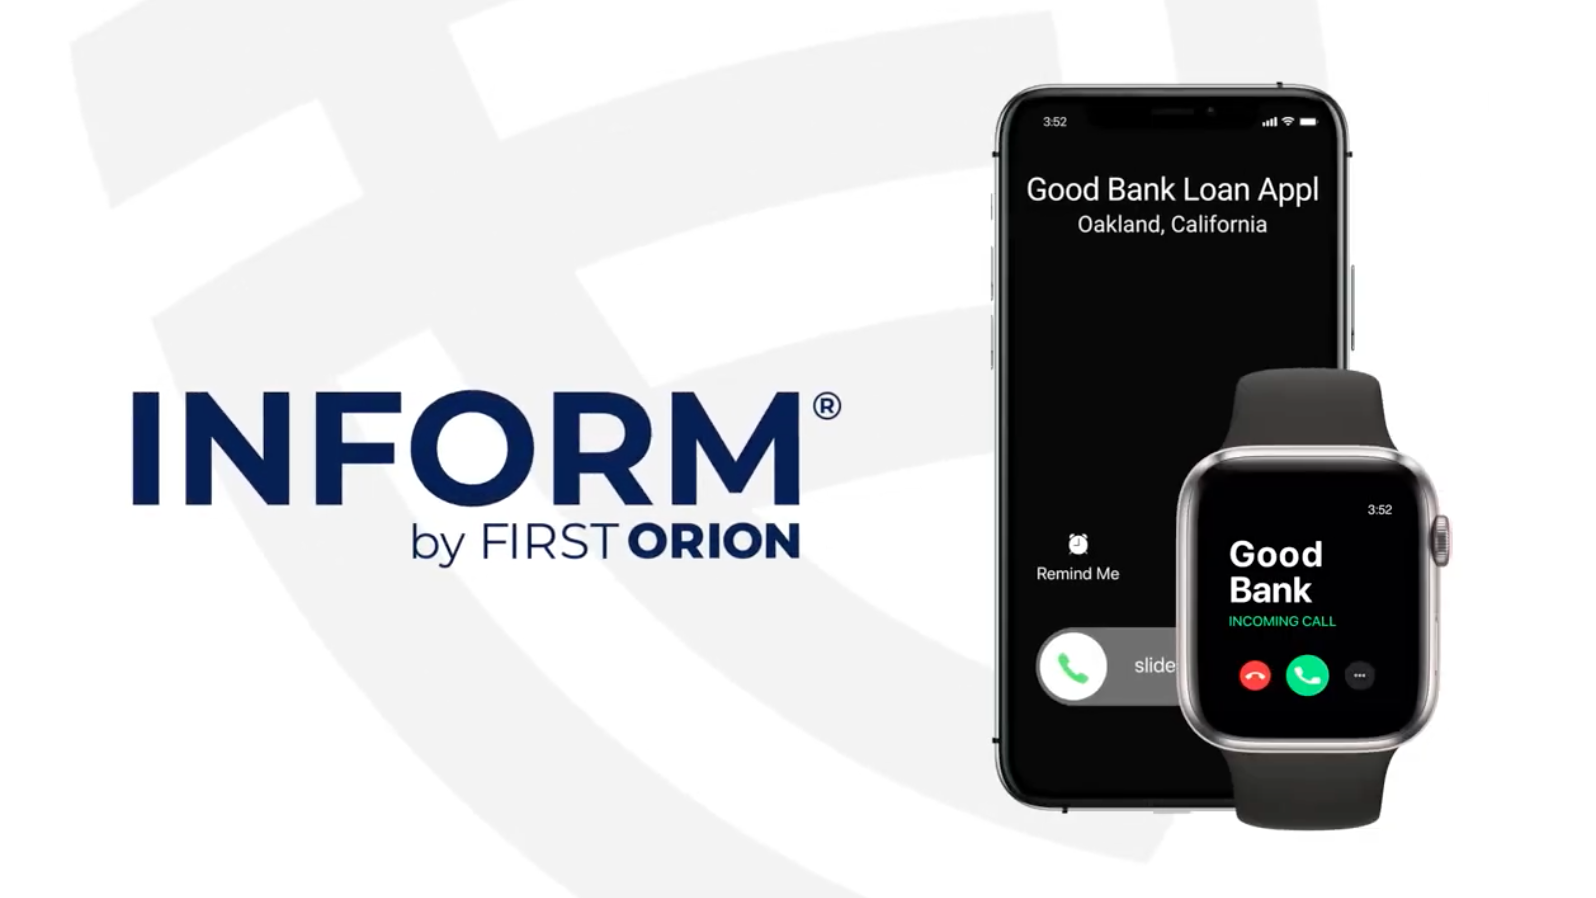 INFORM Branded Caller ID from First Orion